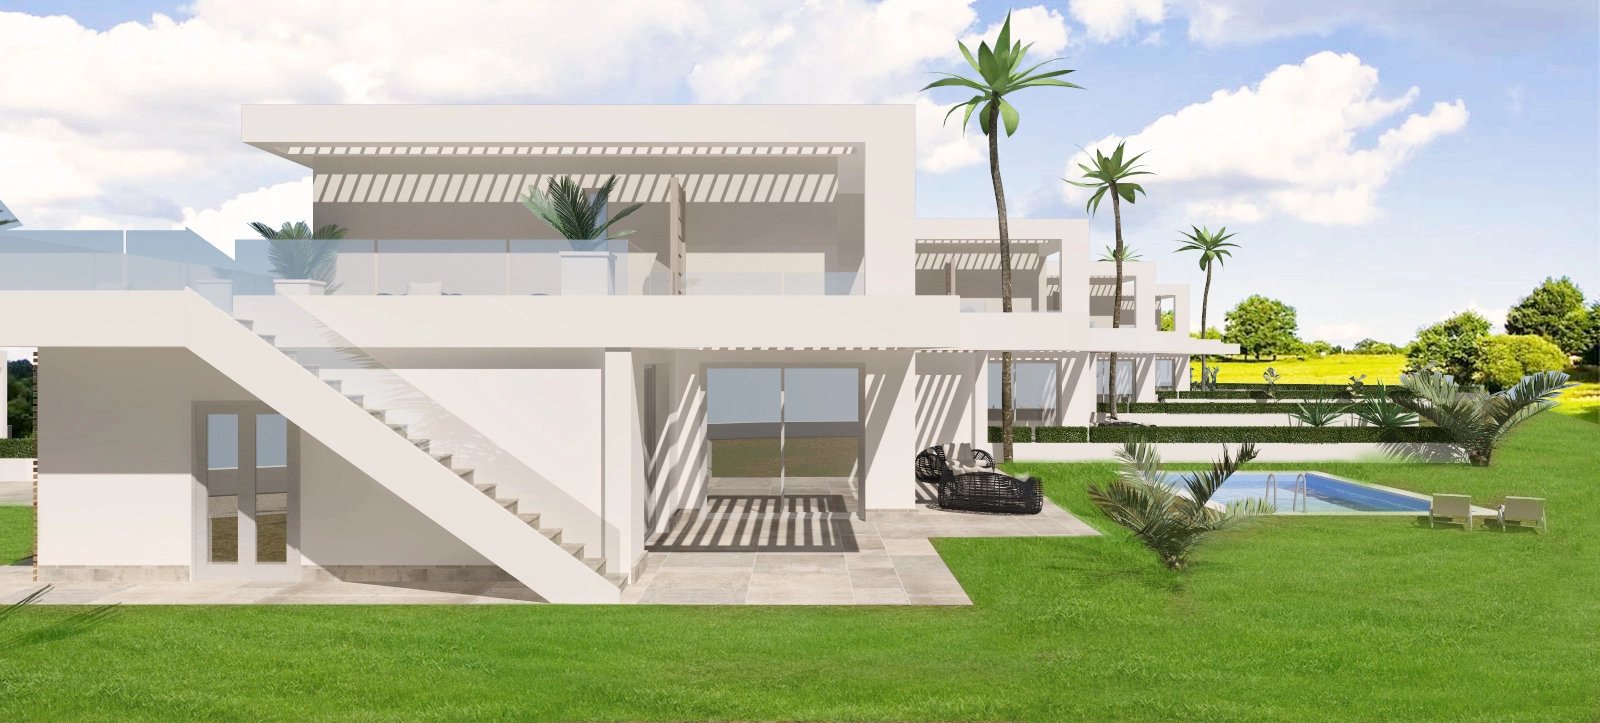 Villa with beach access - pool possible